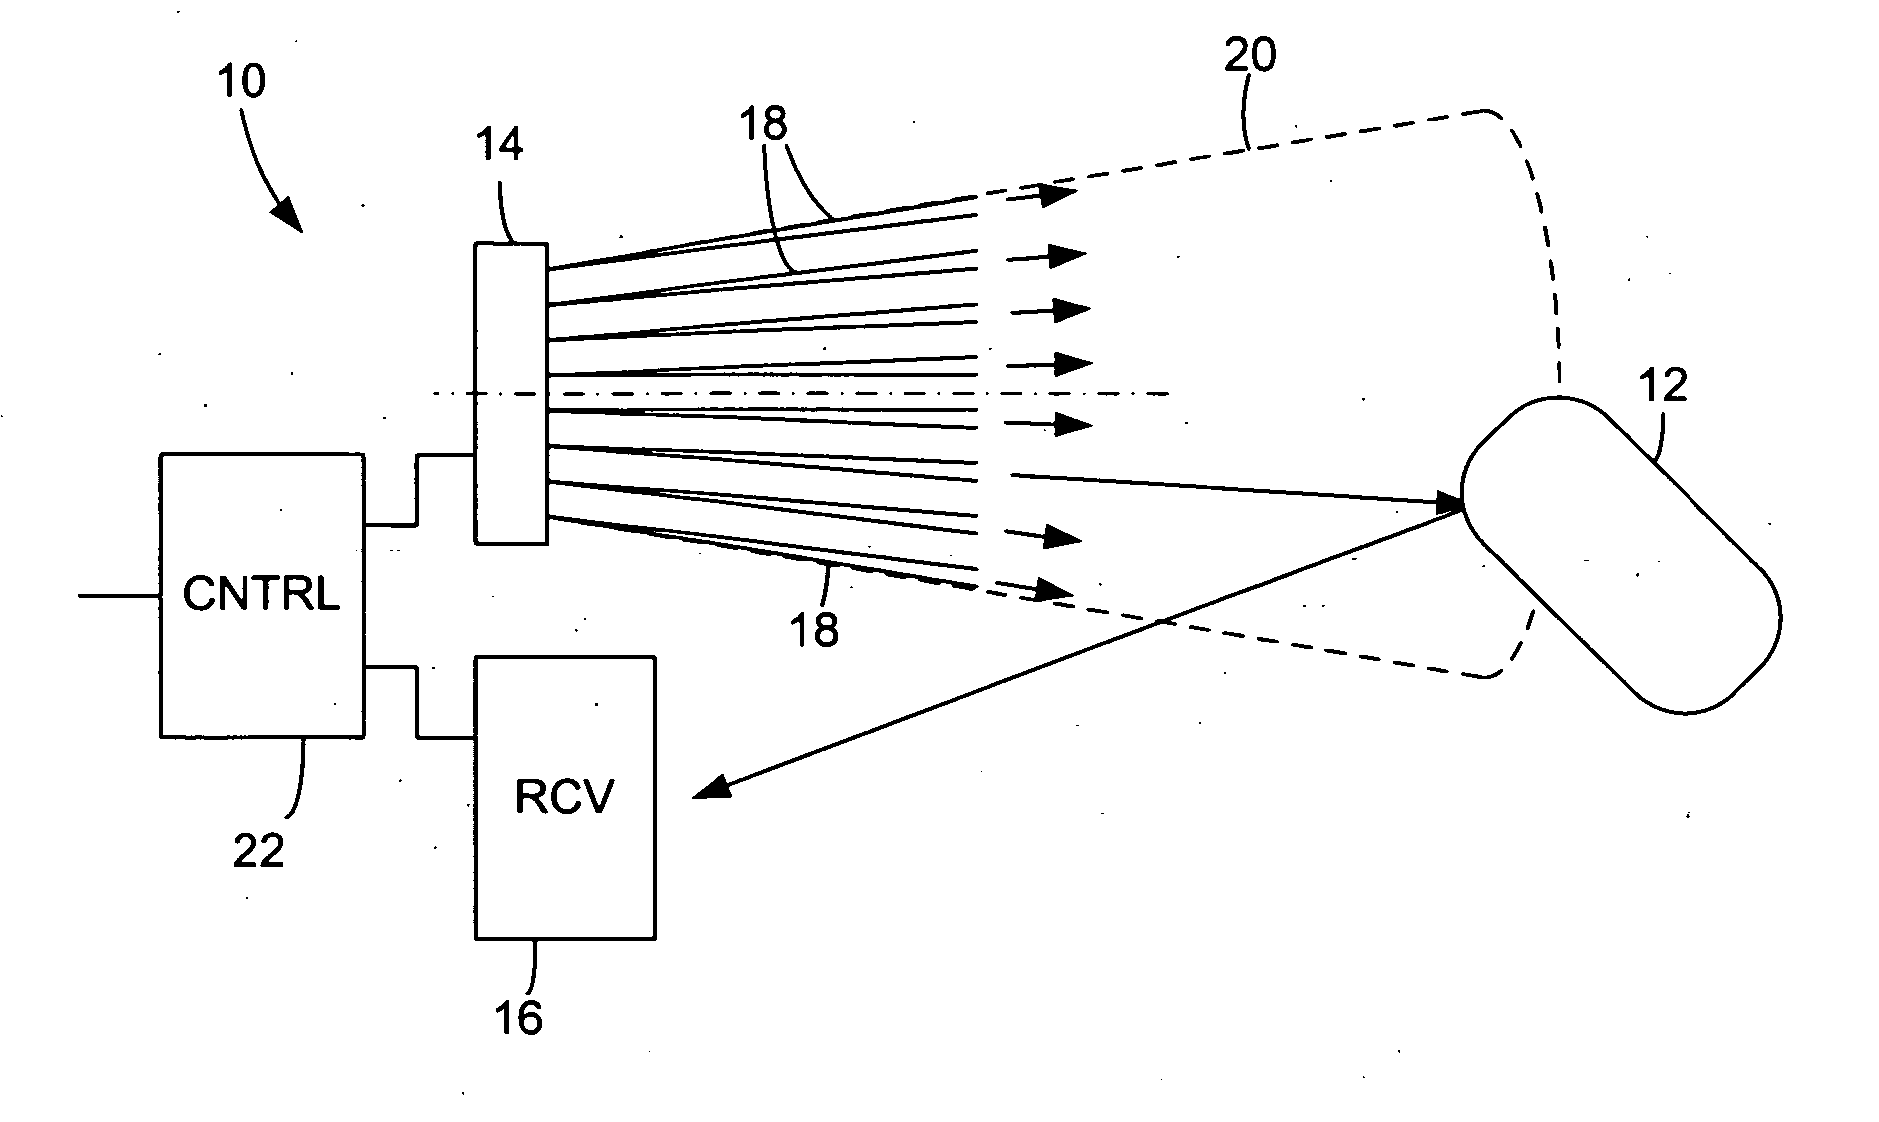 Laser ranging with large-format VCSEL array